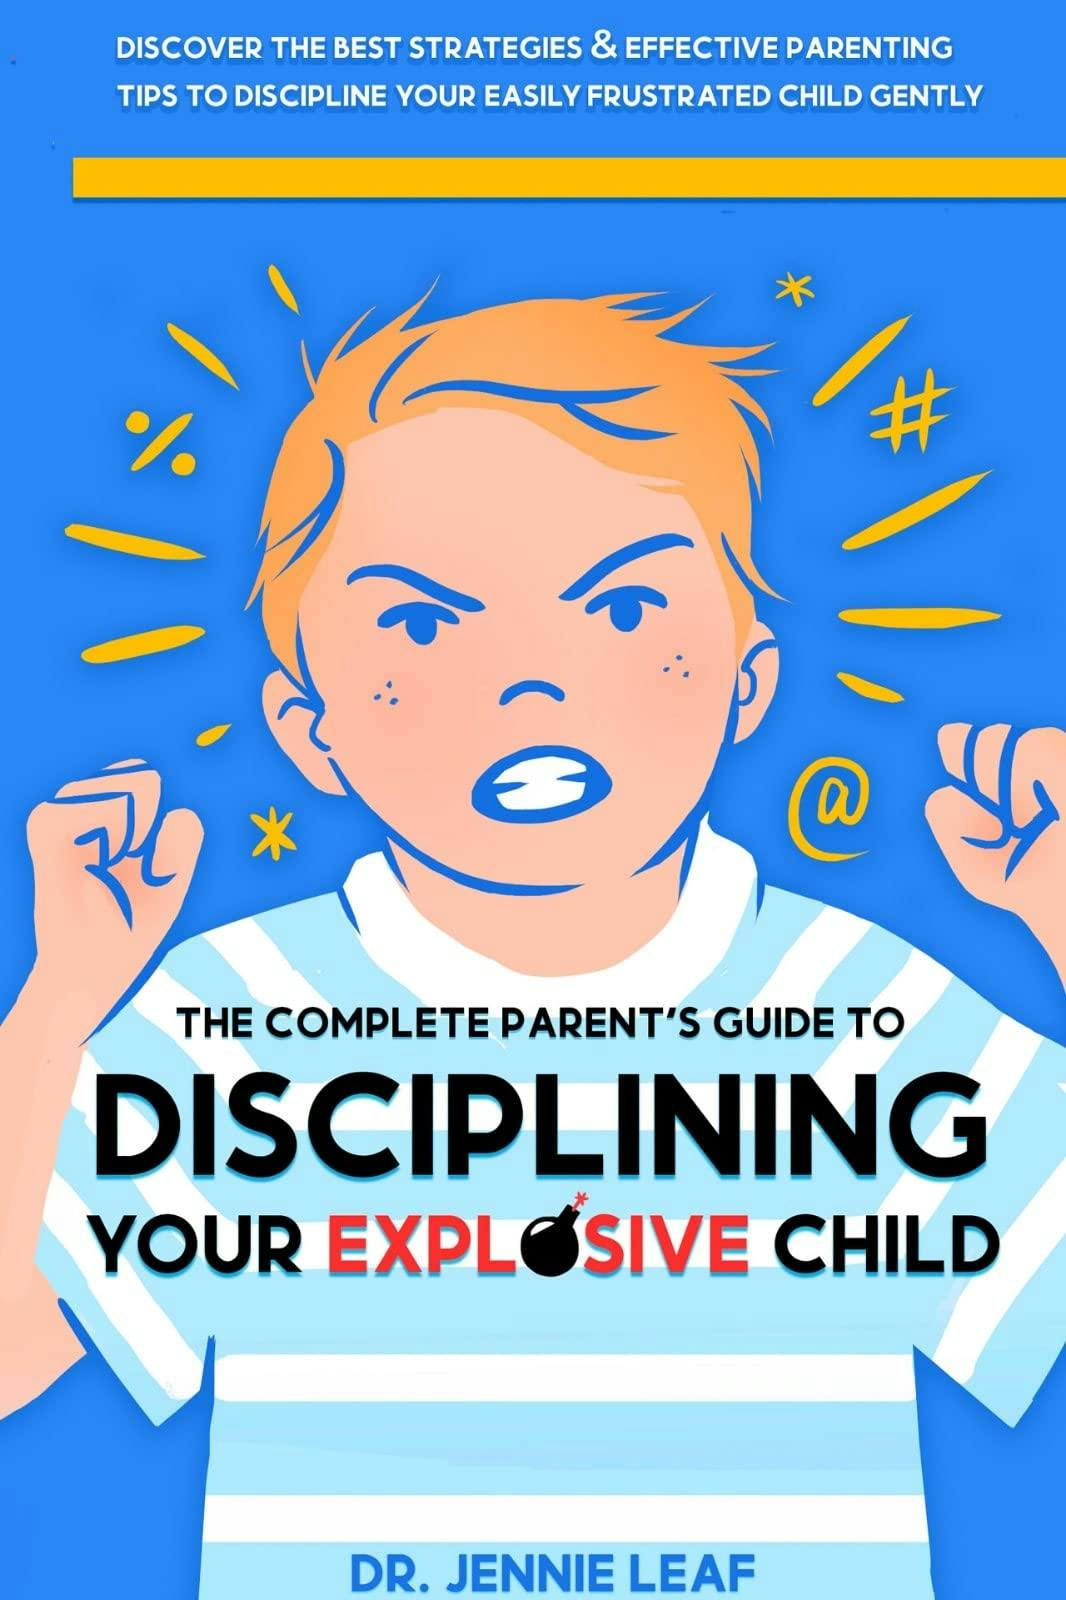 "The Complete Parent’s Guide to Disciplining Your Explosive Child" by "Dr. Jennie Leaf"